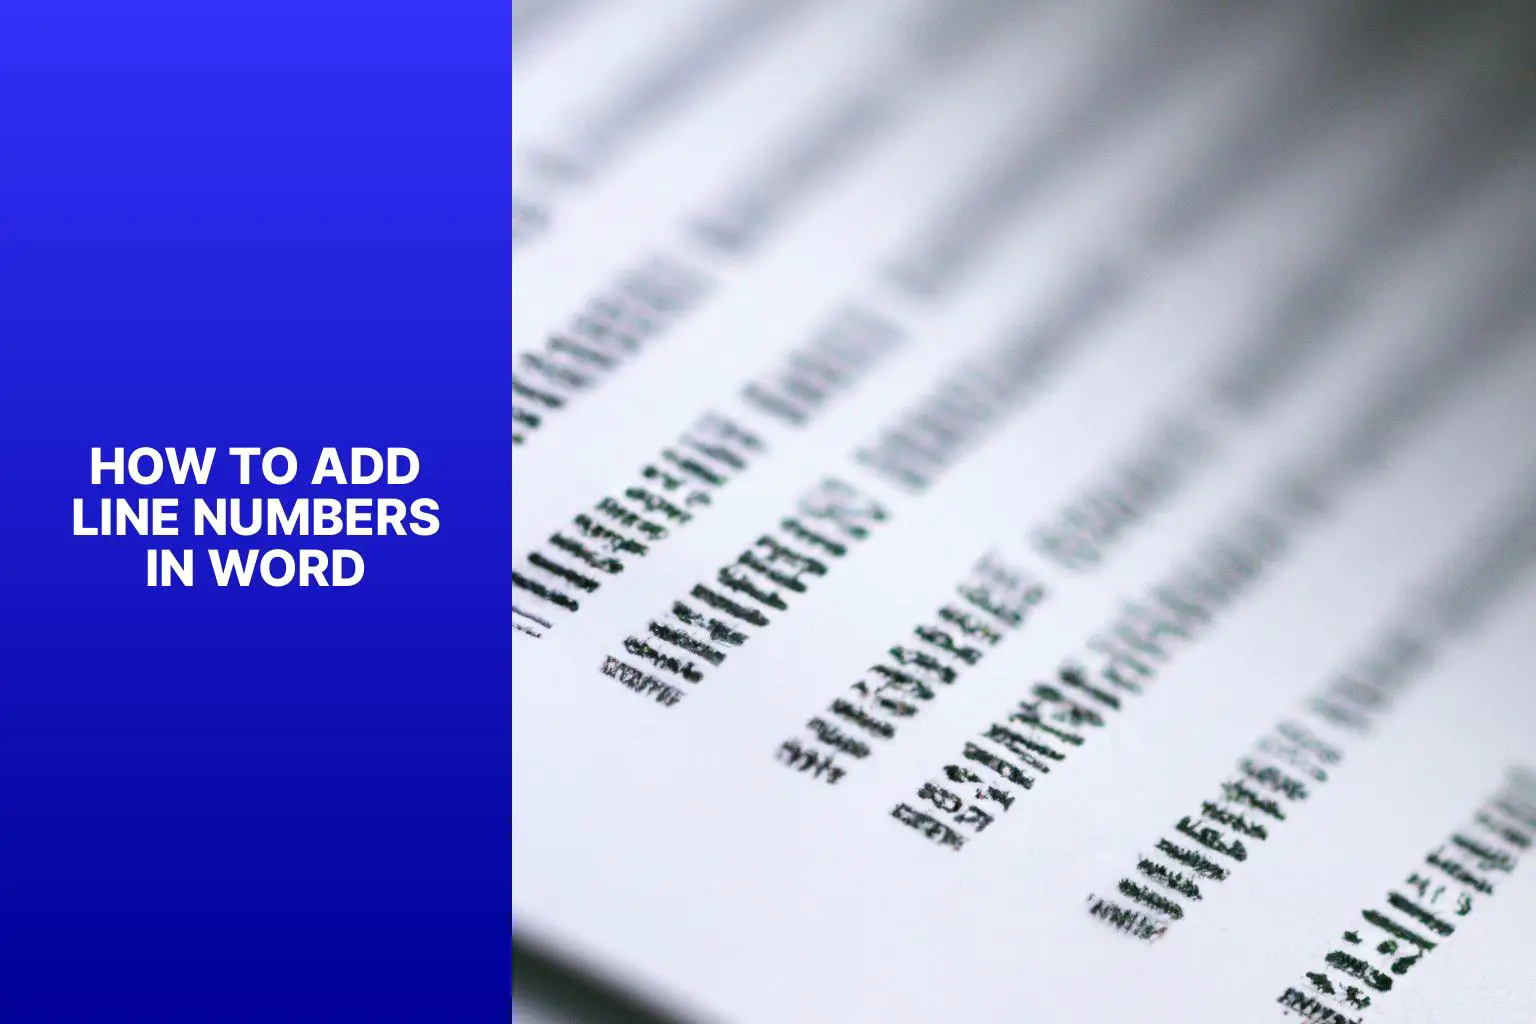 A Step-by-Step Guide: How to Add Line Numbers in Word